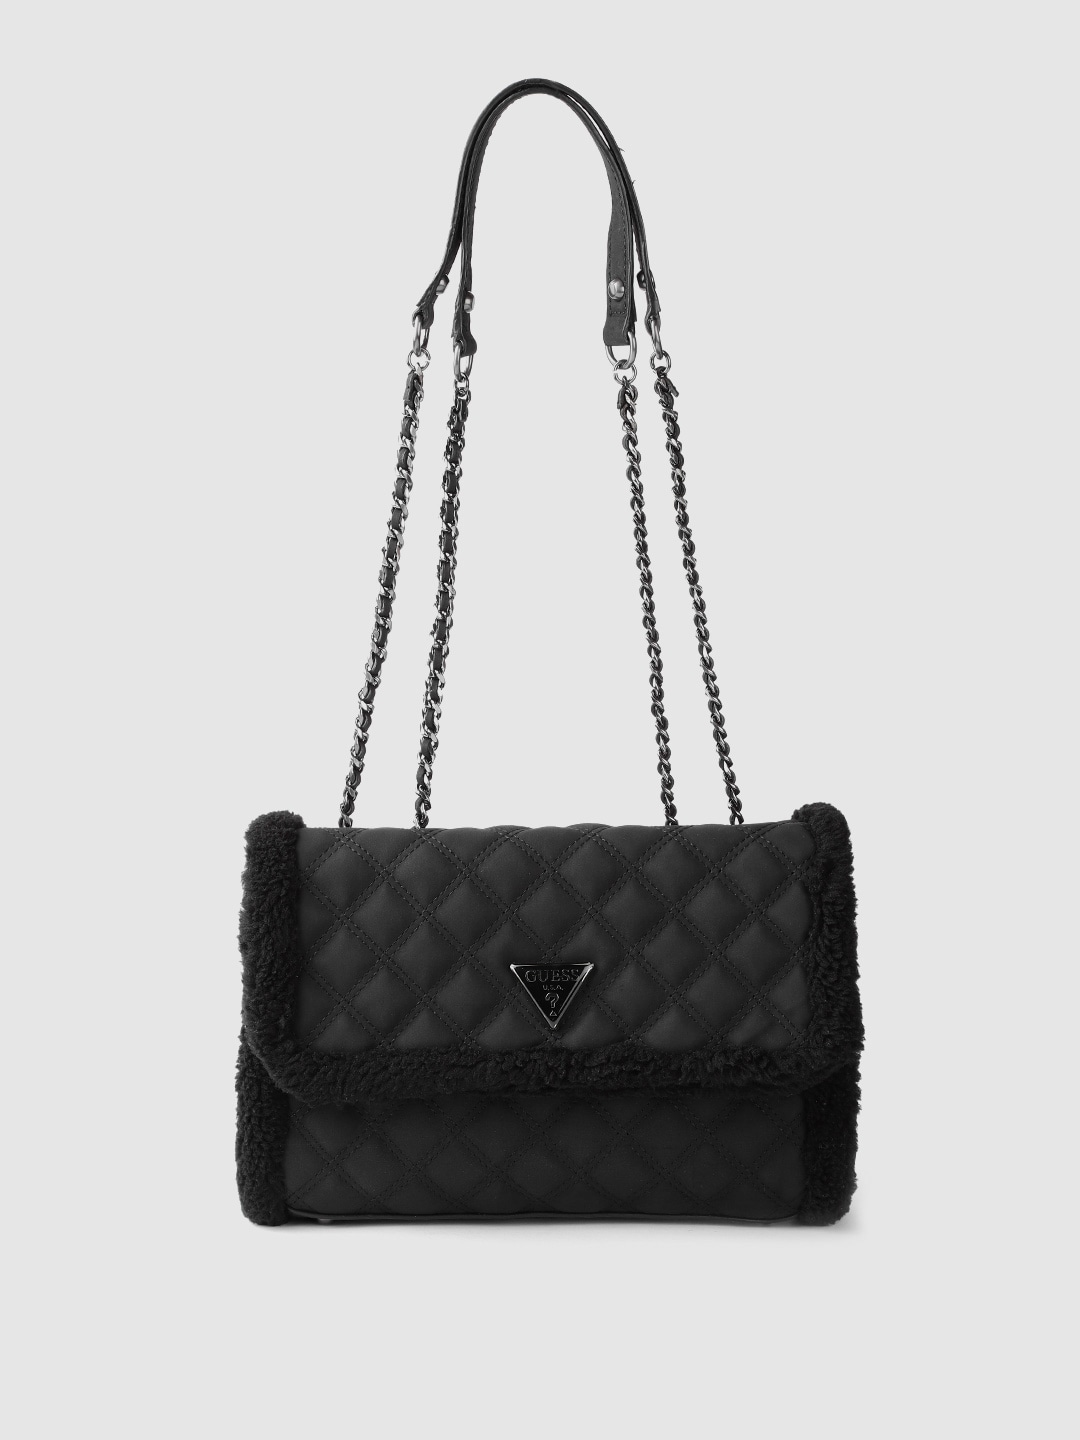 GUESS Women Black Solid Quilted Structured Sling Bag Price in India